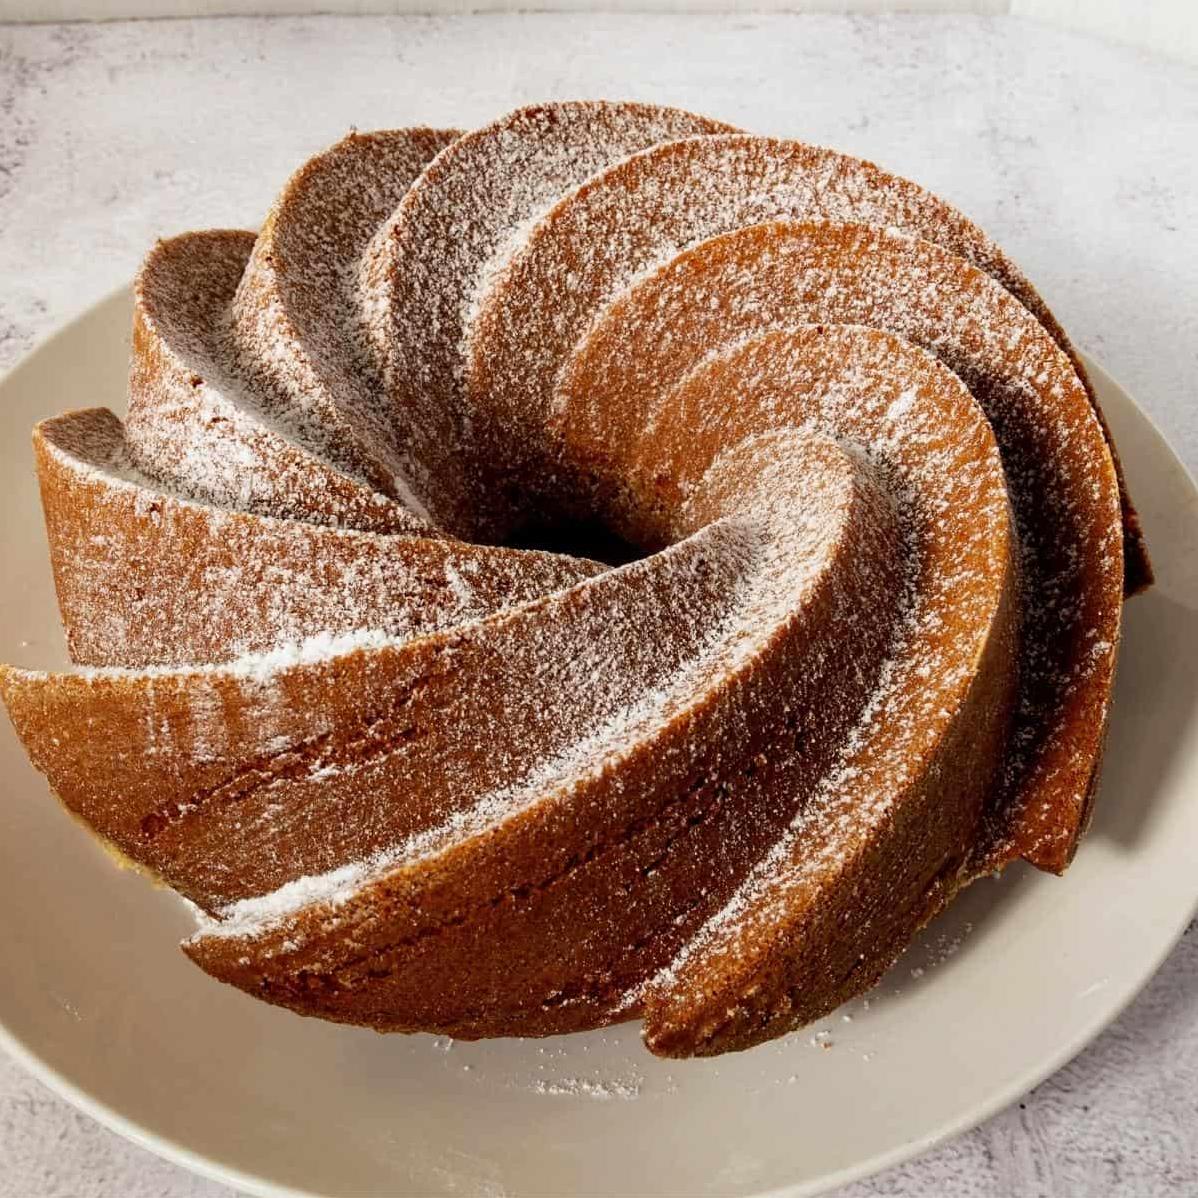  Get ready to fall in love with this Jewish Pound Cake